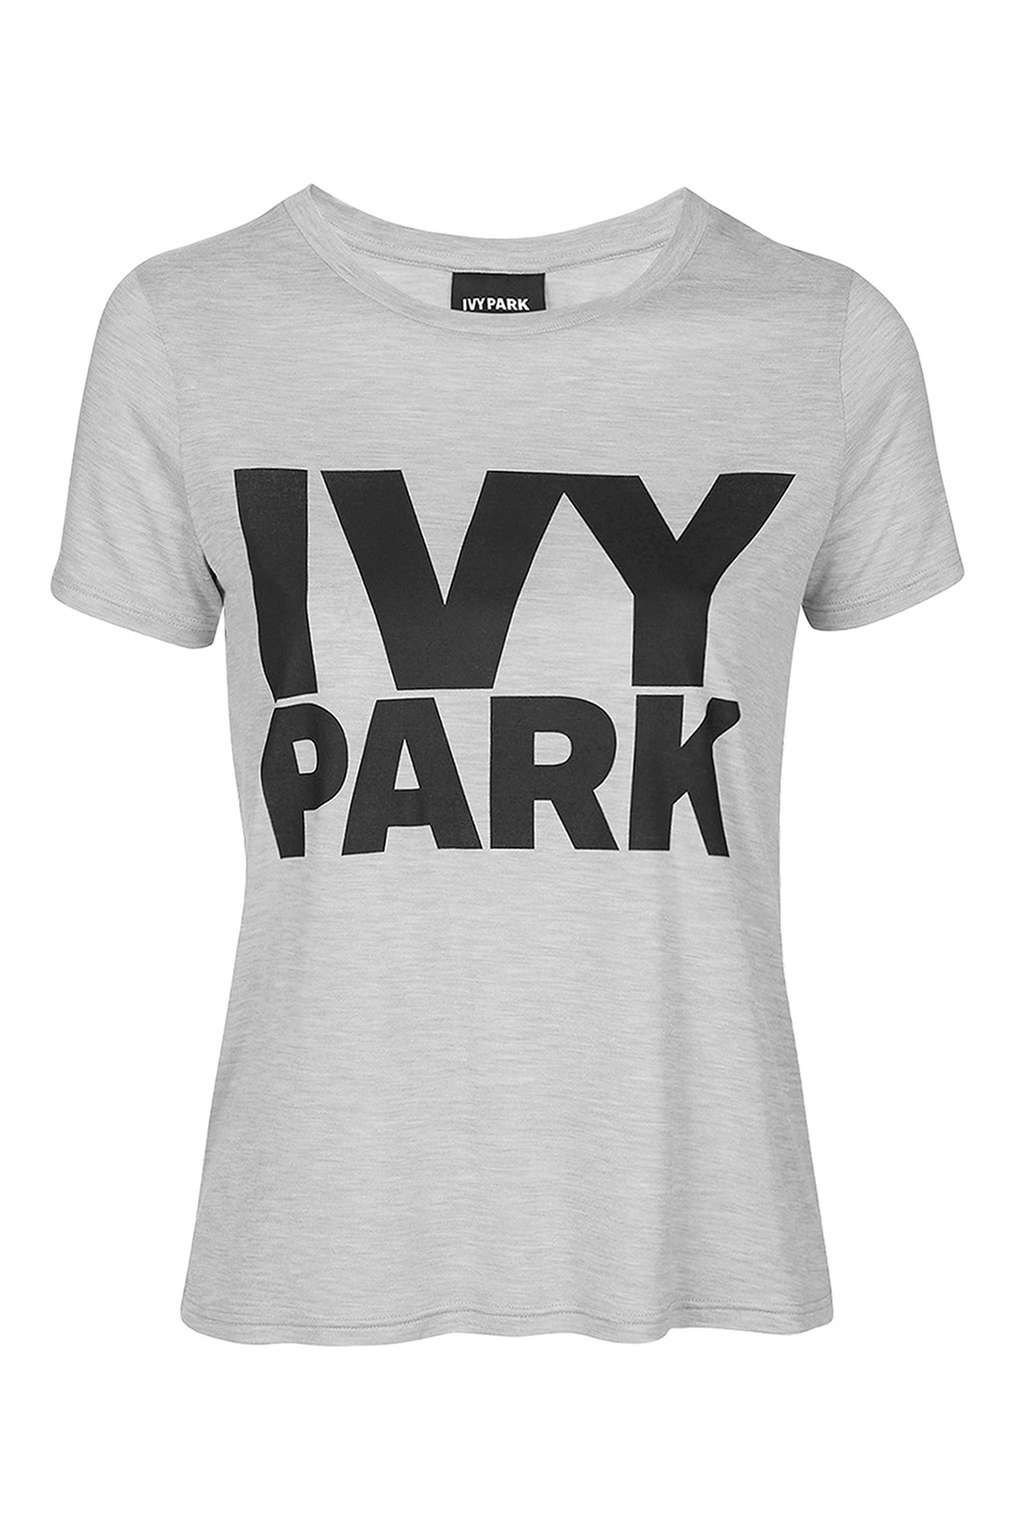 ivy park sold out